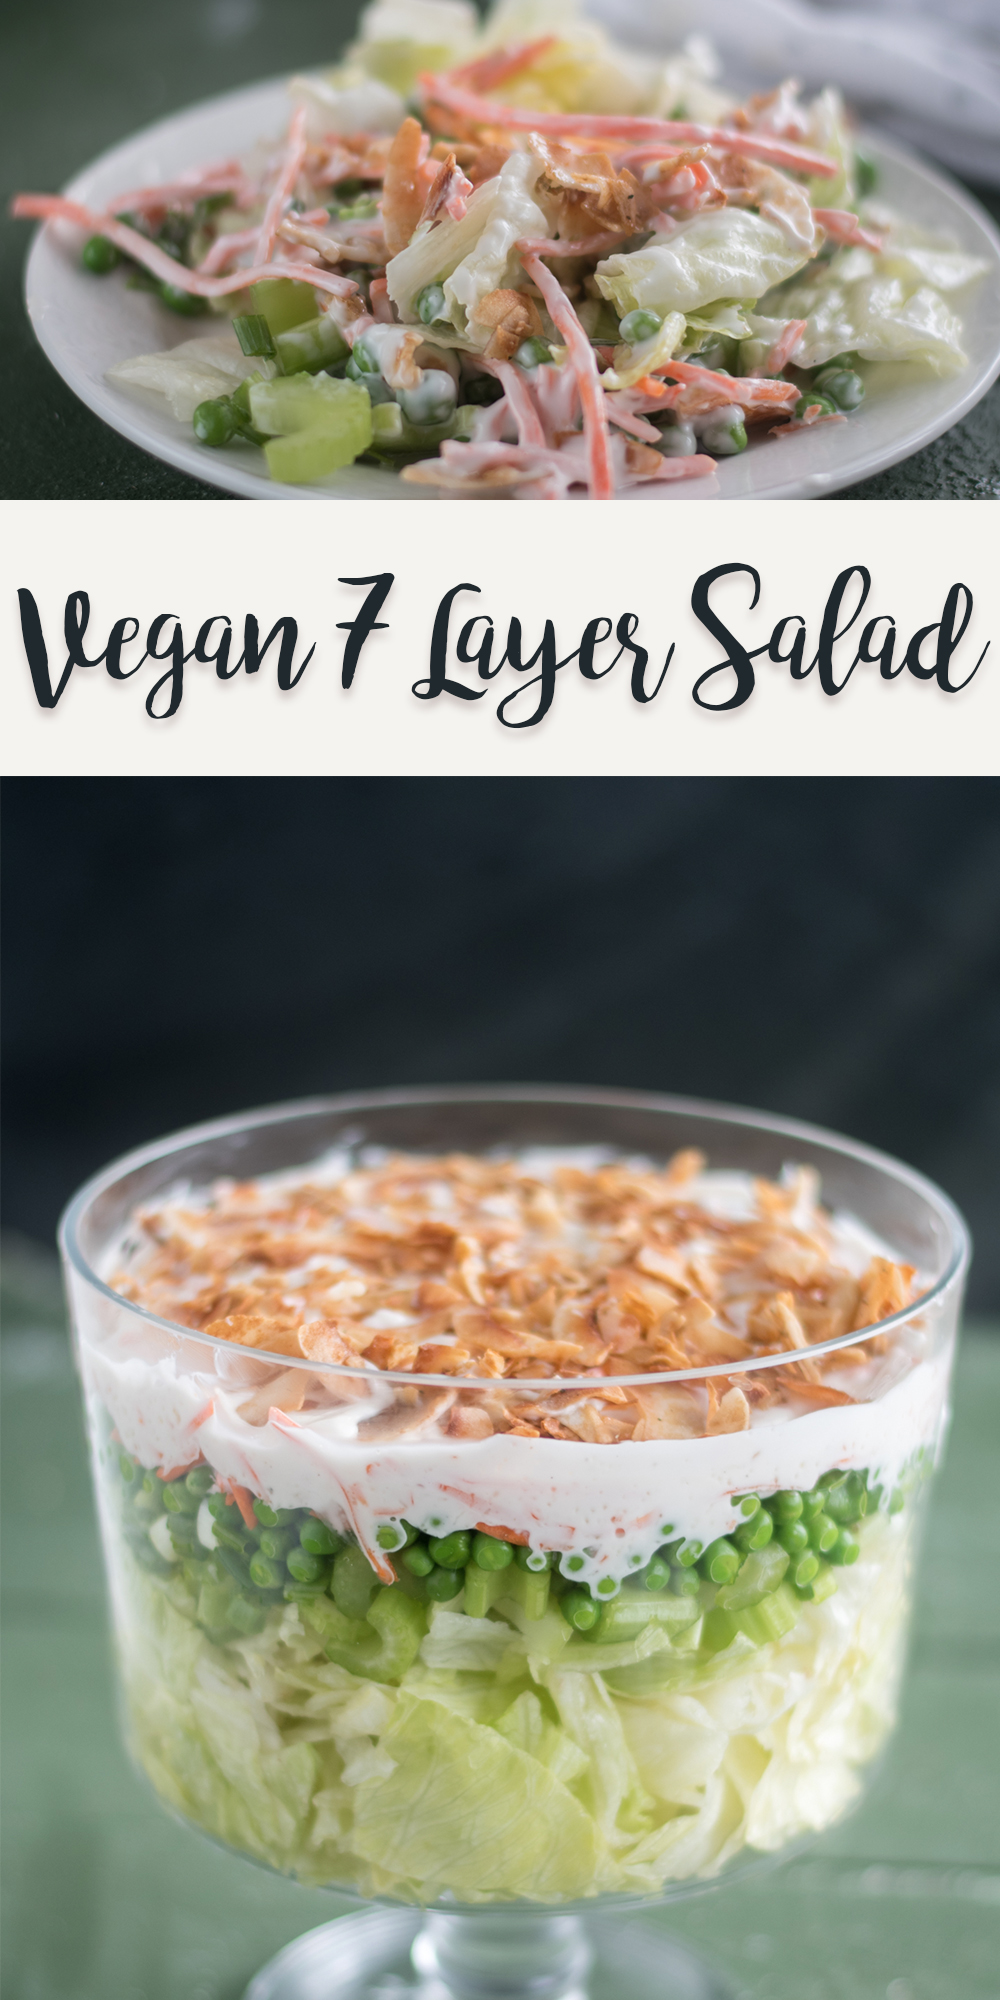 Veagn 7 Layer Salad, also known as overnight salad, is great for potlucks and parties because it can be made ahead of time! #vegan #salad #veganrecipes #Christmas #holiday #vegetarianrecipes #dairyfree #glutenfree